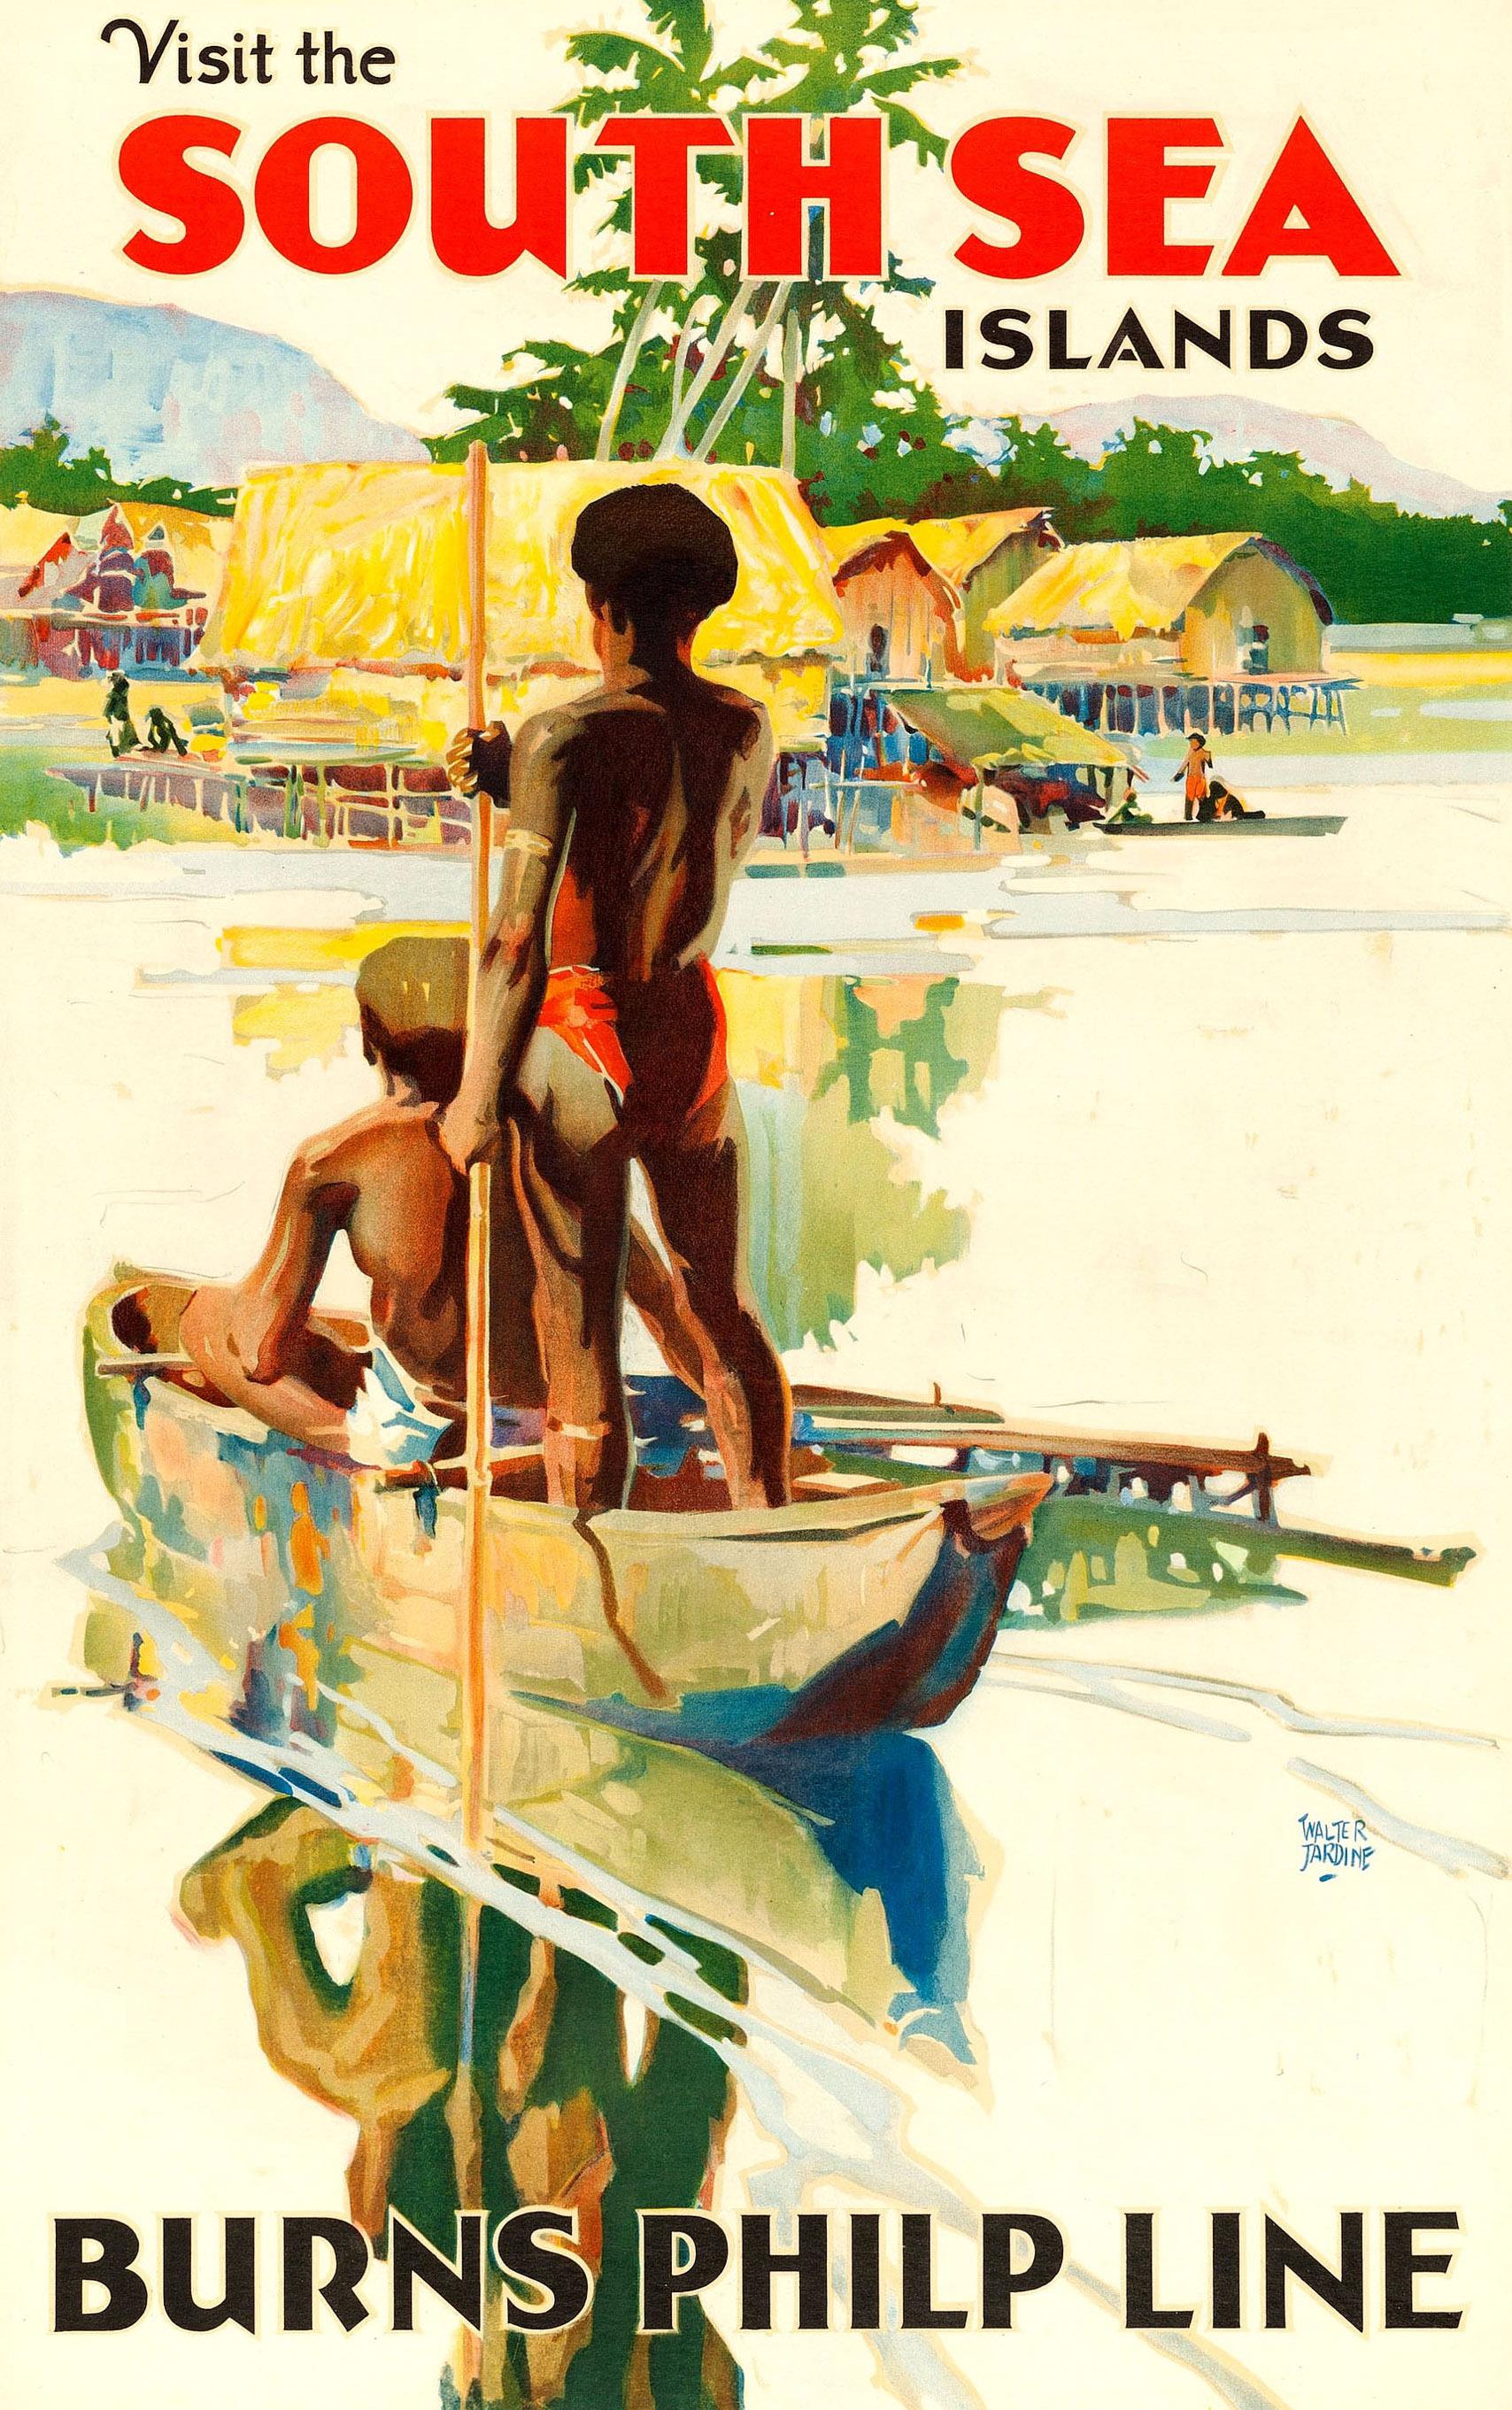 Original vintage travel advertising poster: Visit the South Sea Islands – Burns Philp Line. Colourful illustration by the Australian artist Walter Jardine (1884-1970) featuring two men rowing a traditional wooden outrigger canoe boat towards a